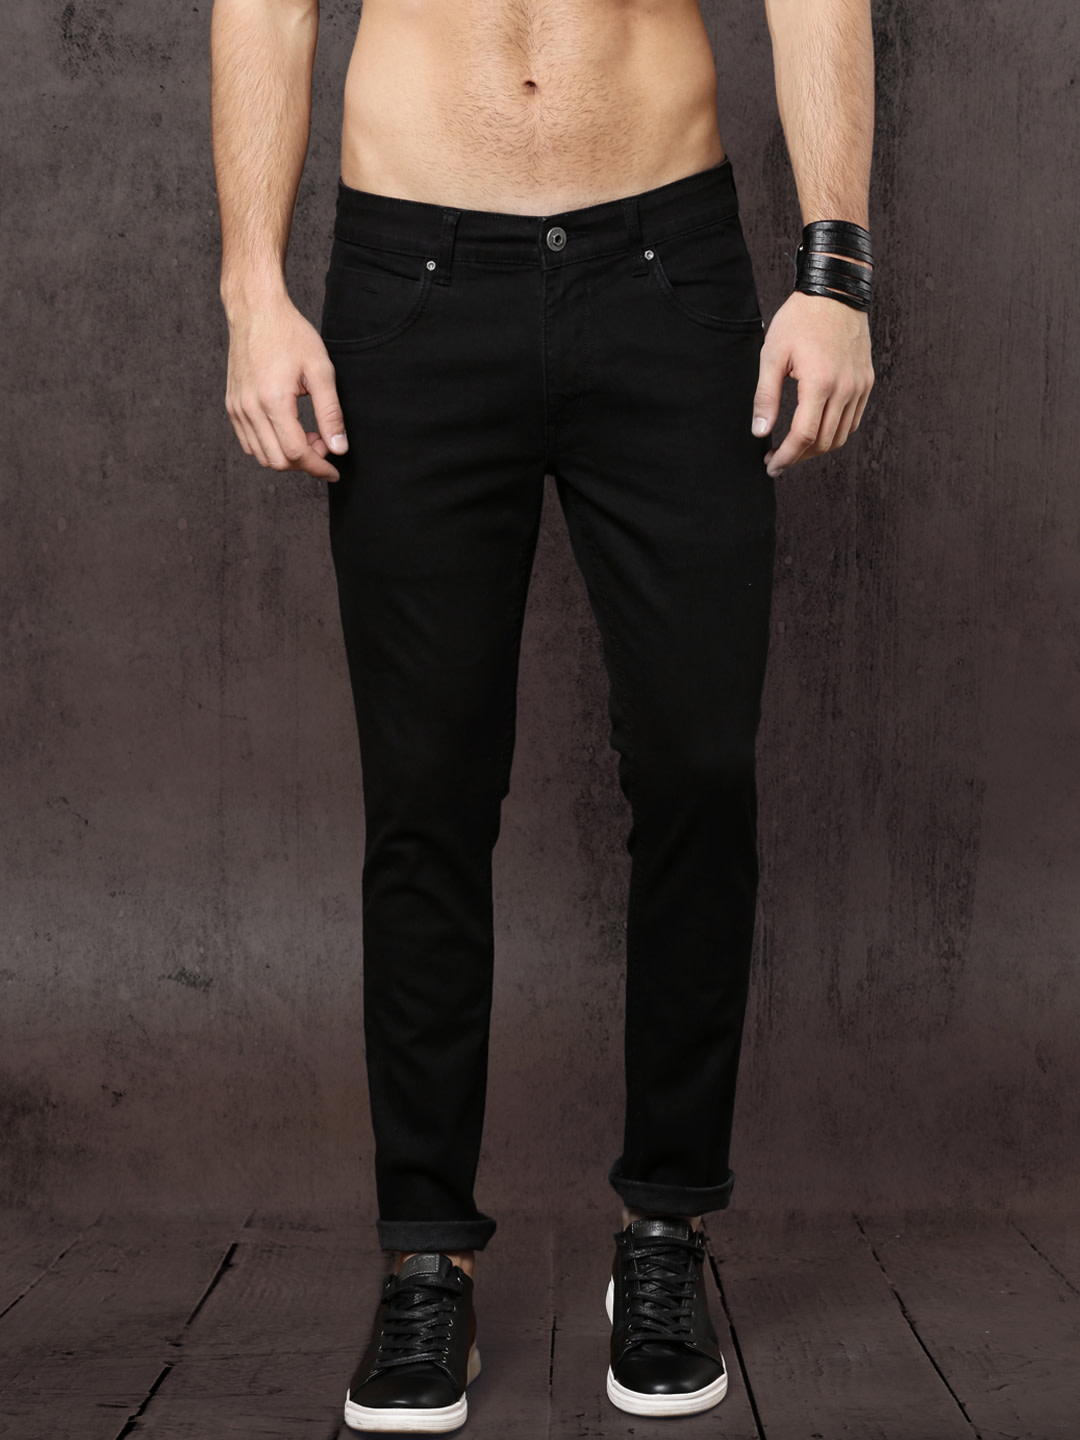 Cobra Black Jeans “Best Seller” – The Engineers of Clothes